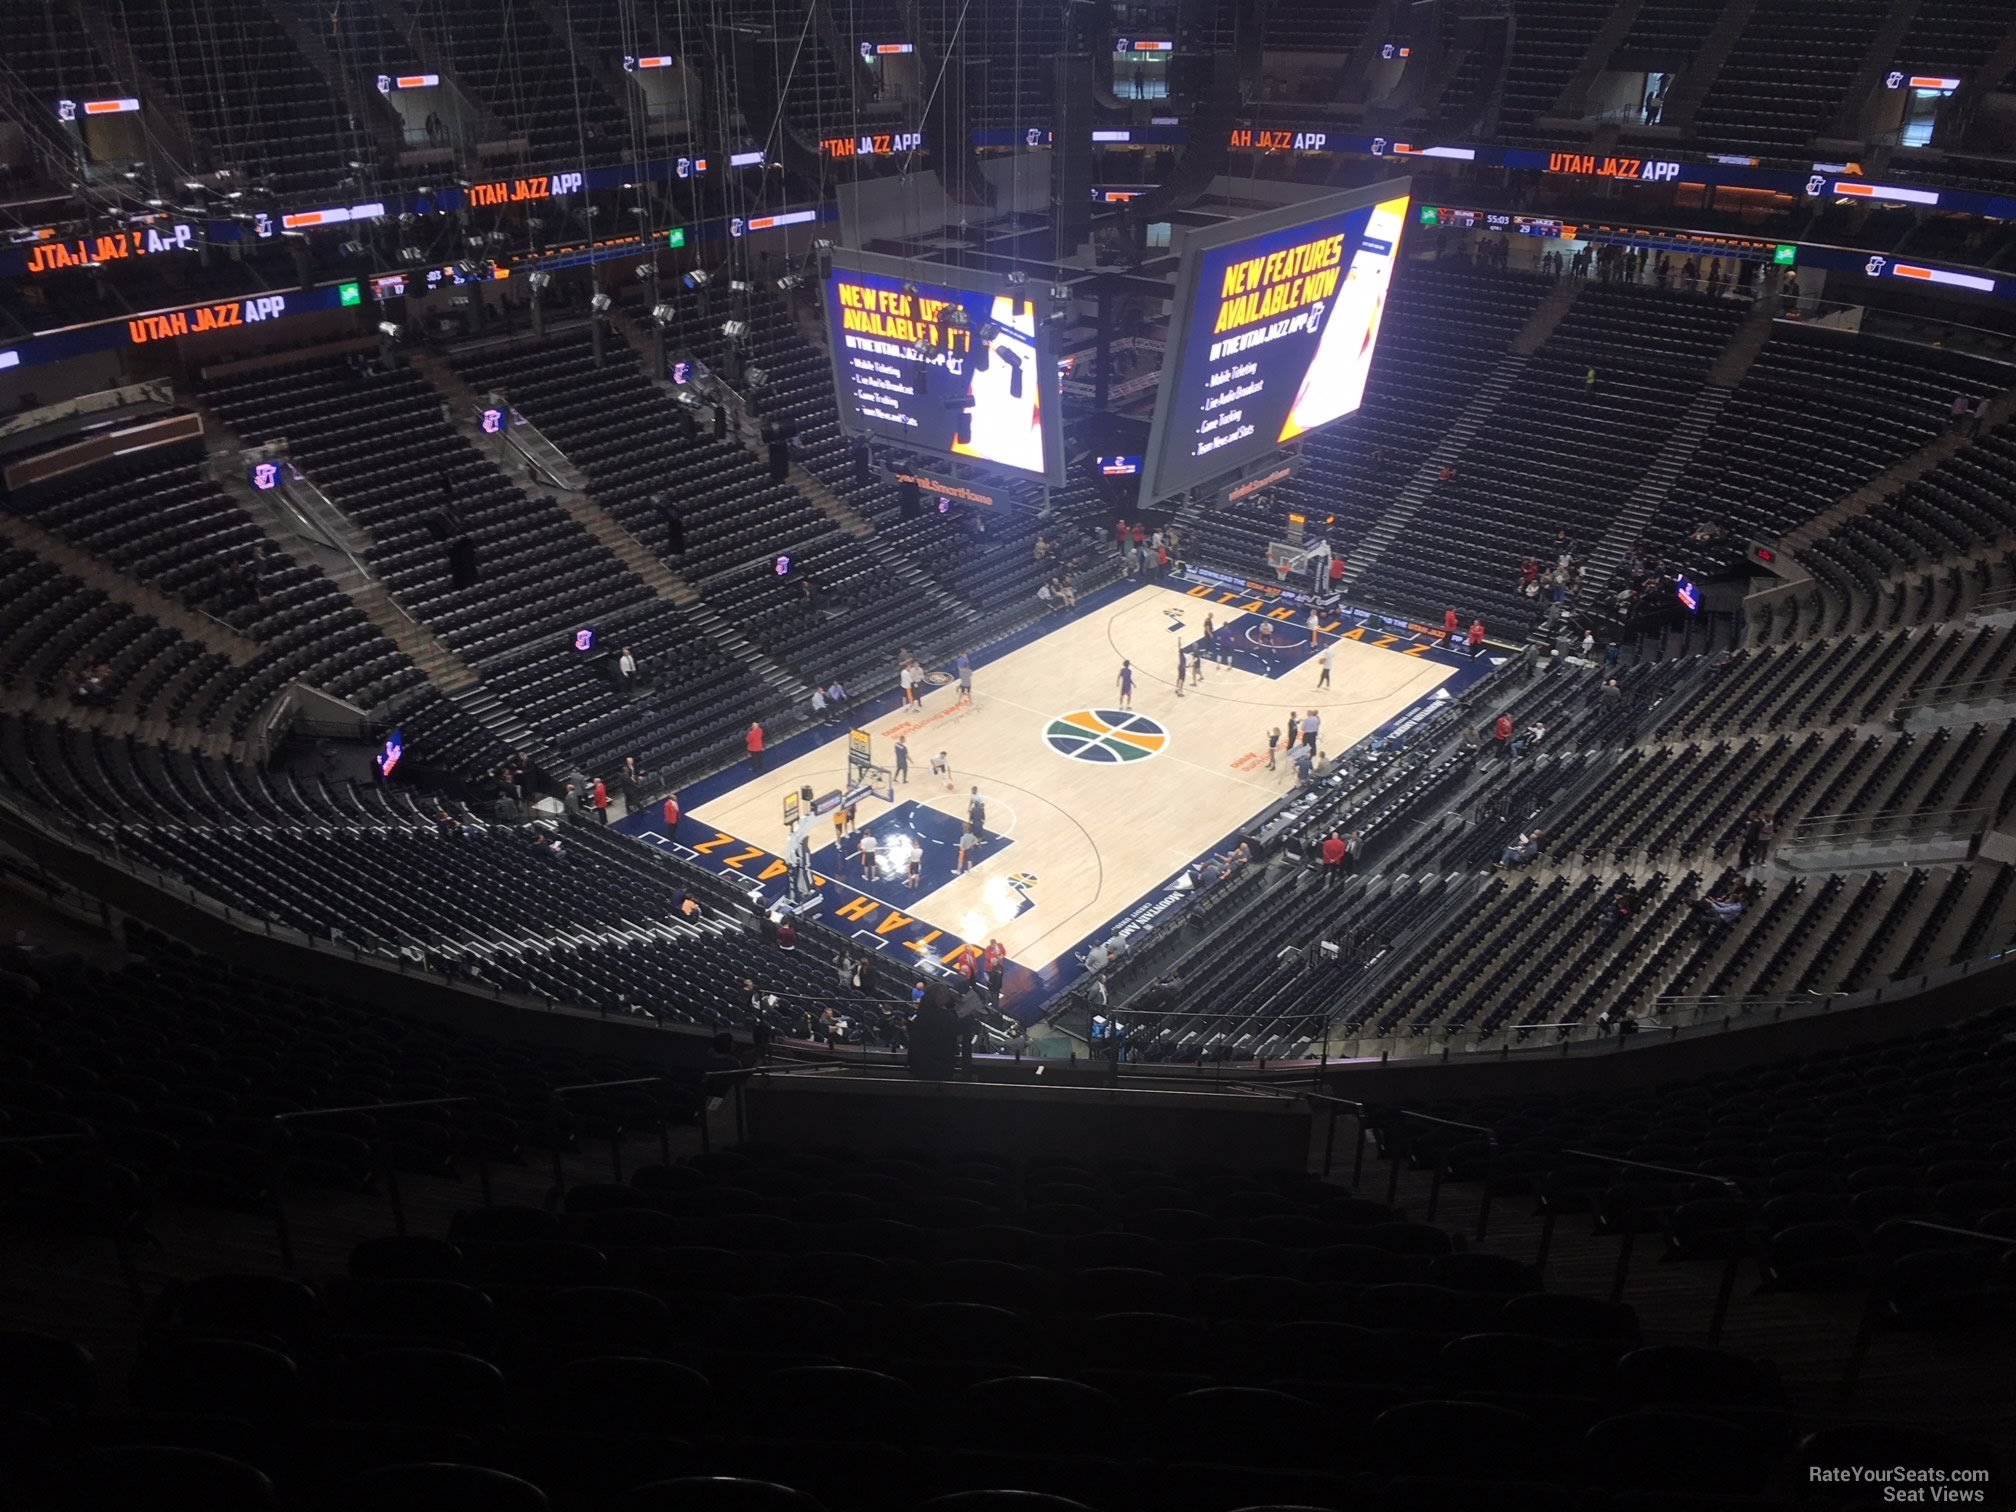 Vivint Smart Home Arena Seating Chart With Seat Numbers